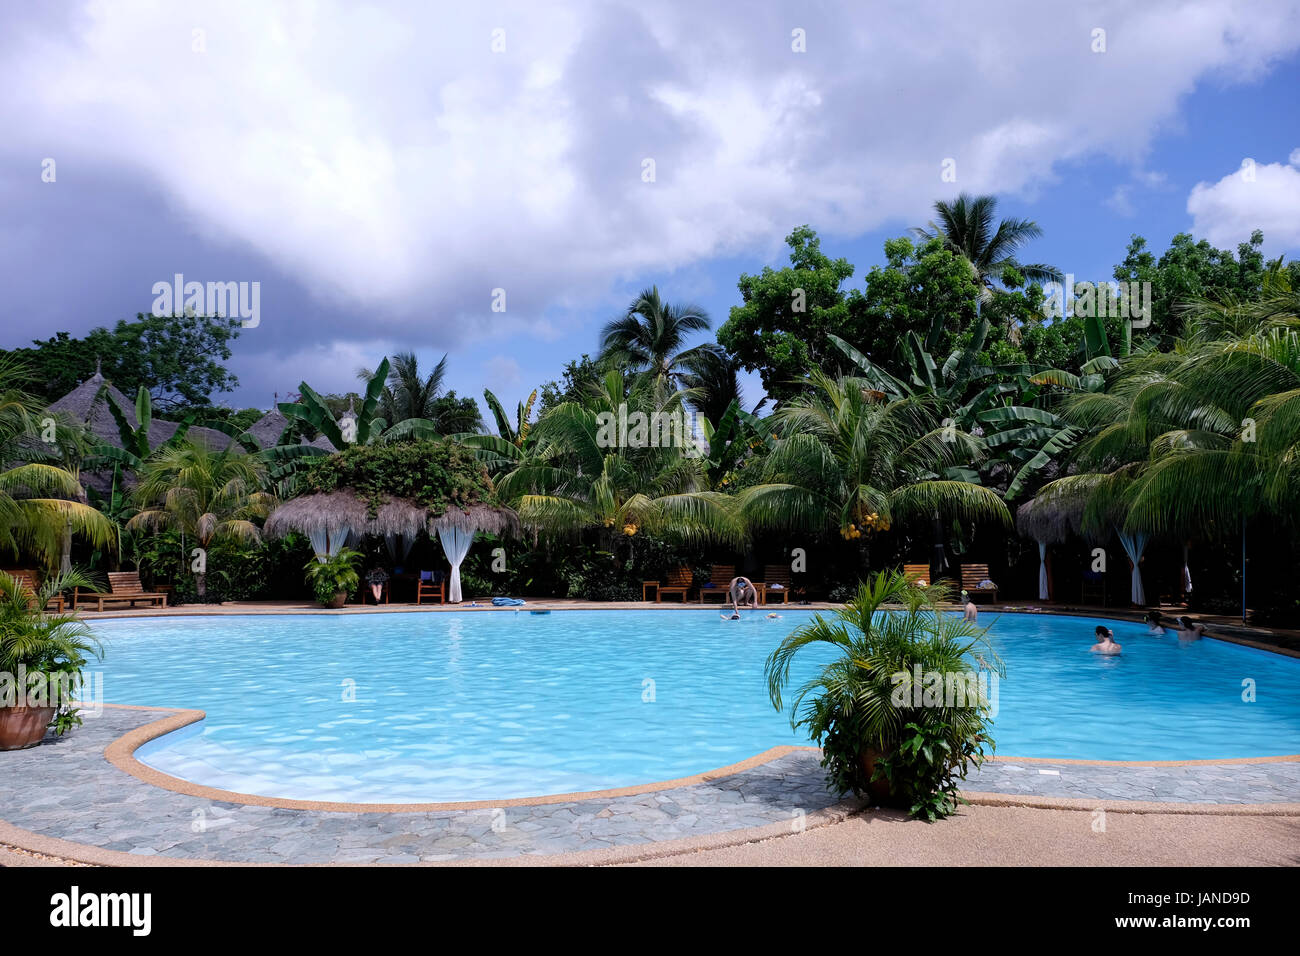 The swimming pool at the Coco Grove Beach Resort in the island of Siquijor located in the Central Visayas region of the Philippines Stock Photo